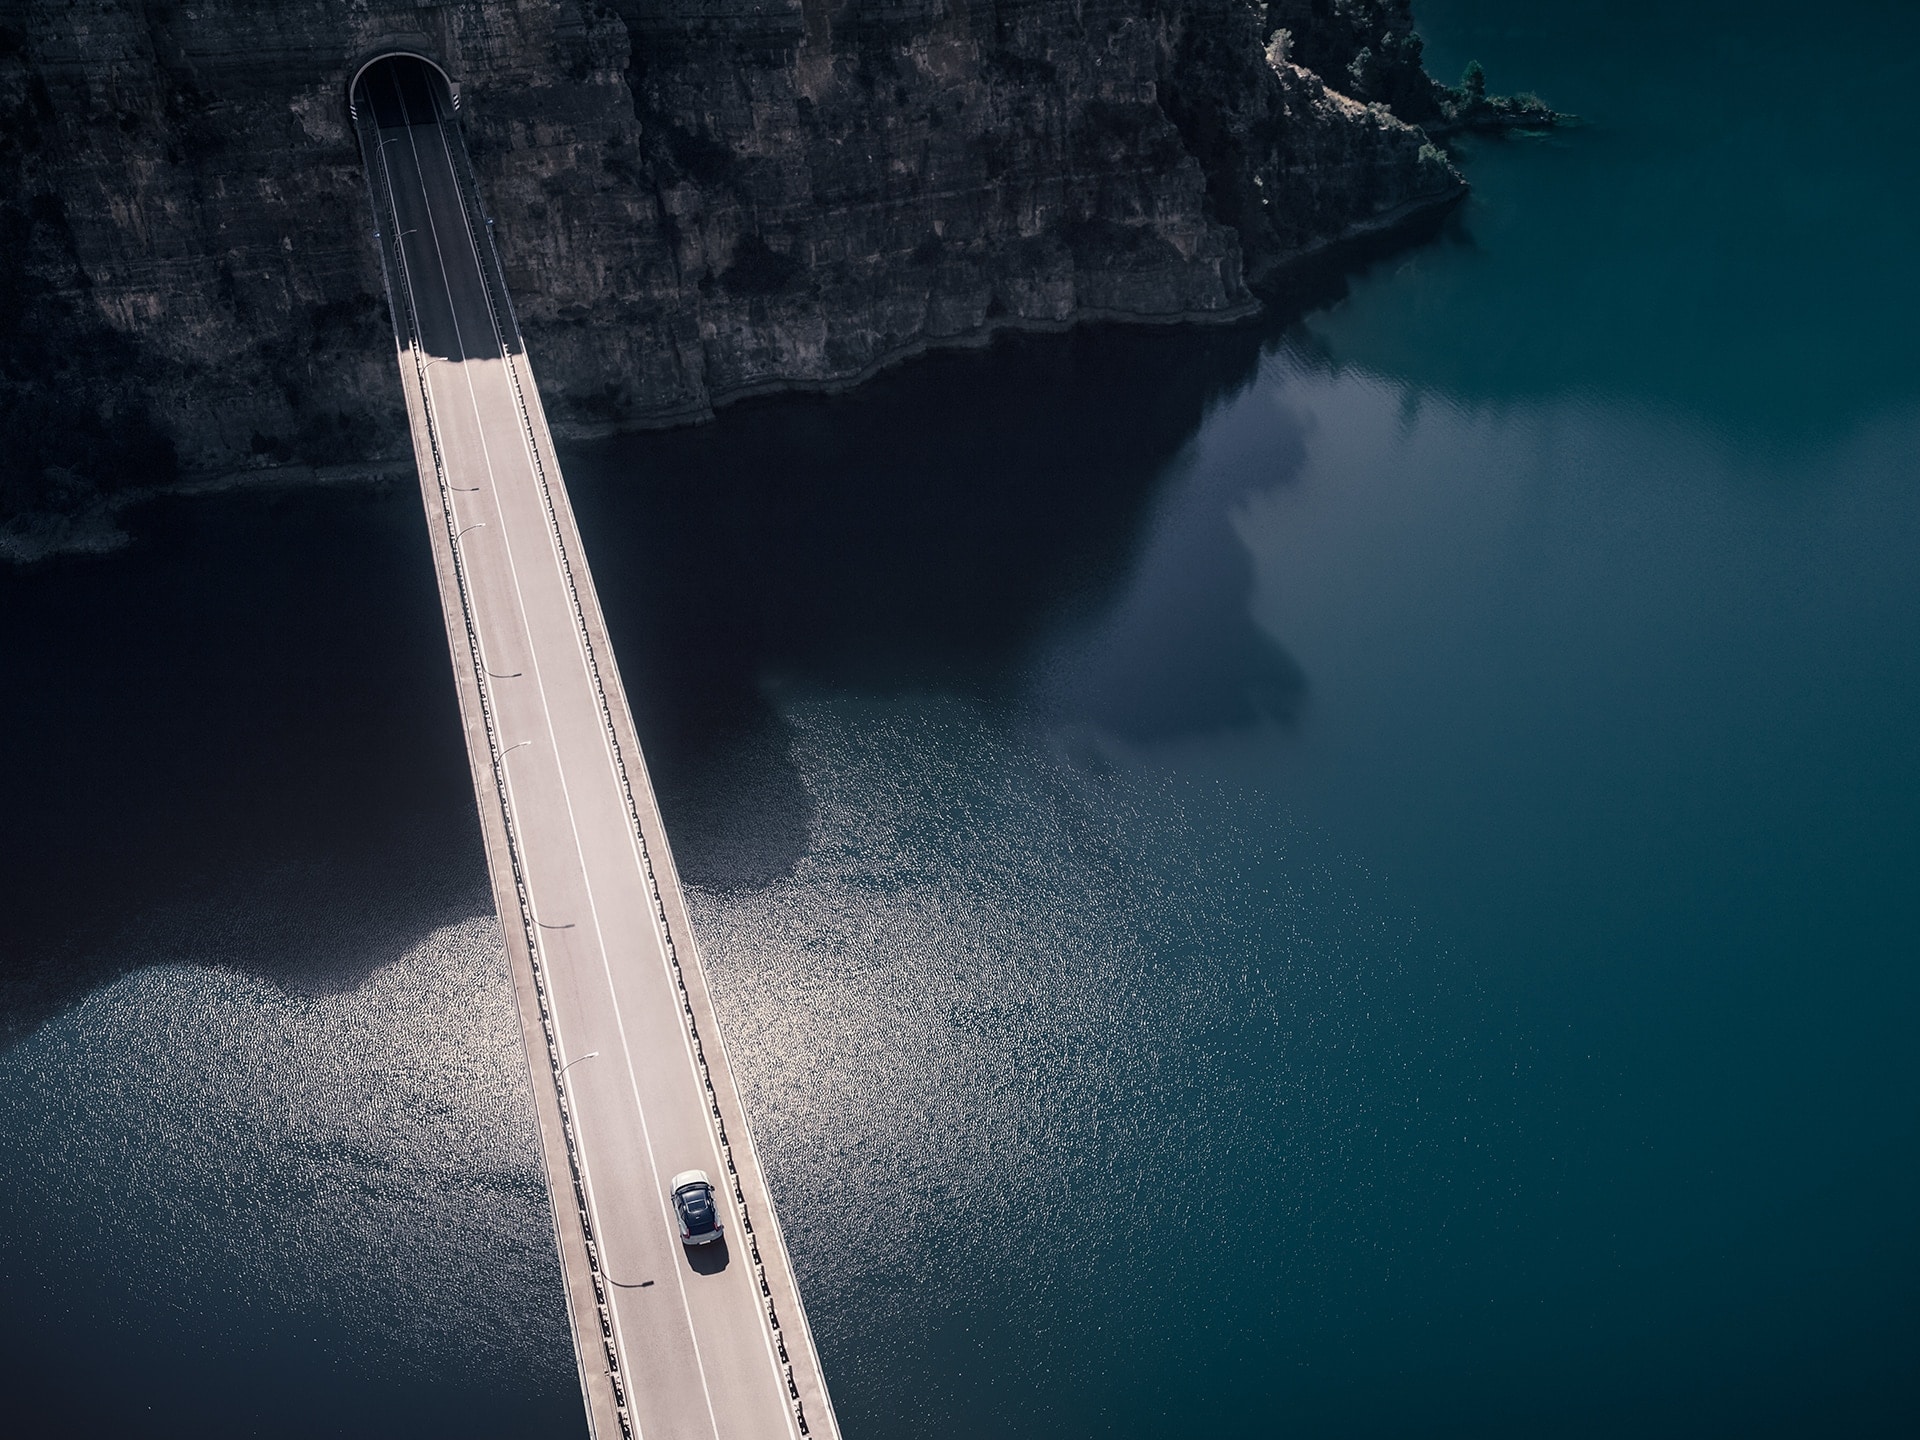 A Volvo XC40 Recharge drives on a bridge over the water that leads into a mountain tunnel.